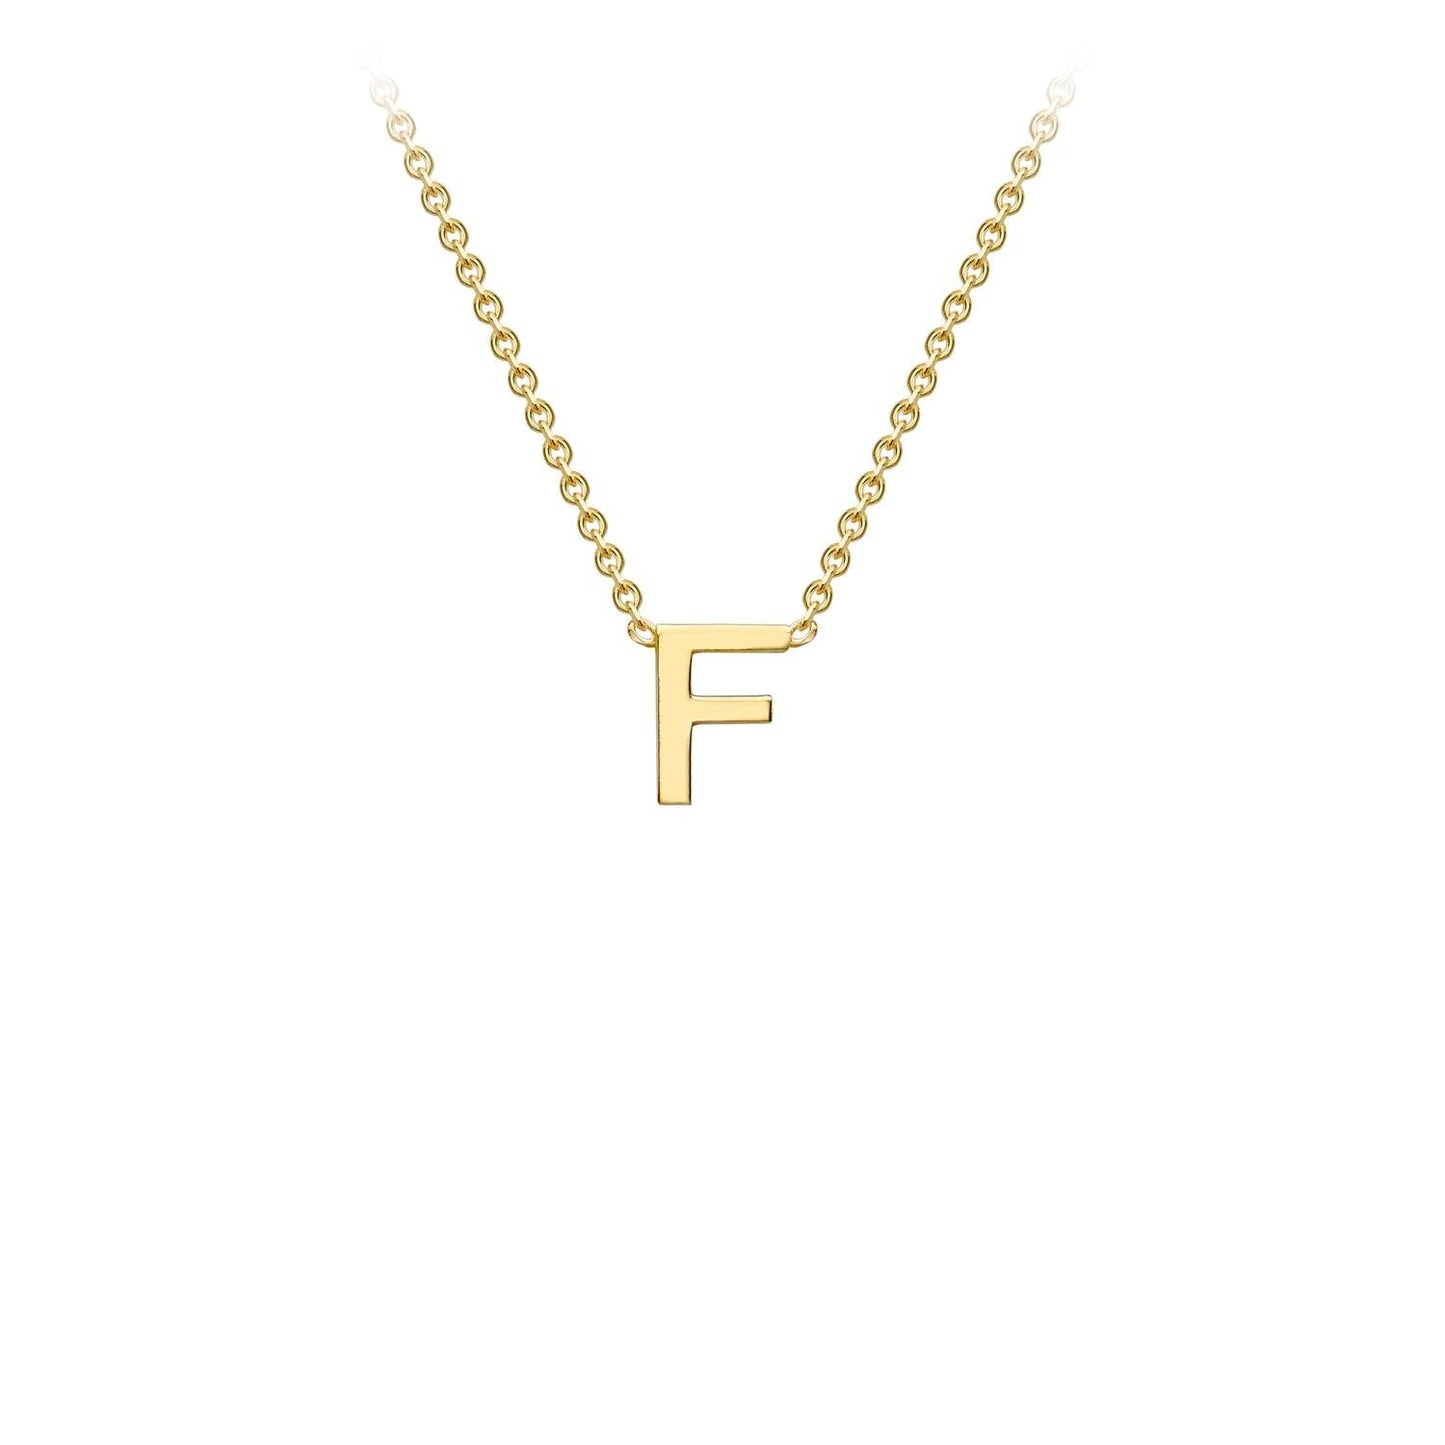 9K Yellow Gold 'F' Initial Adjustable Letter Necklace 38/43cm